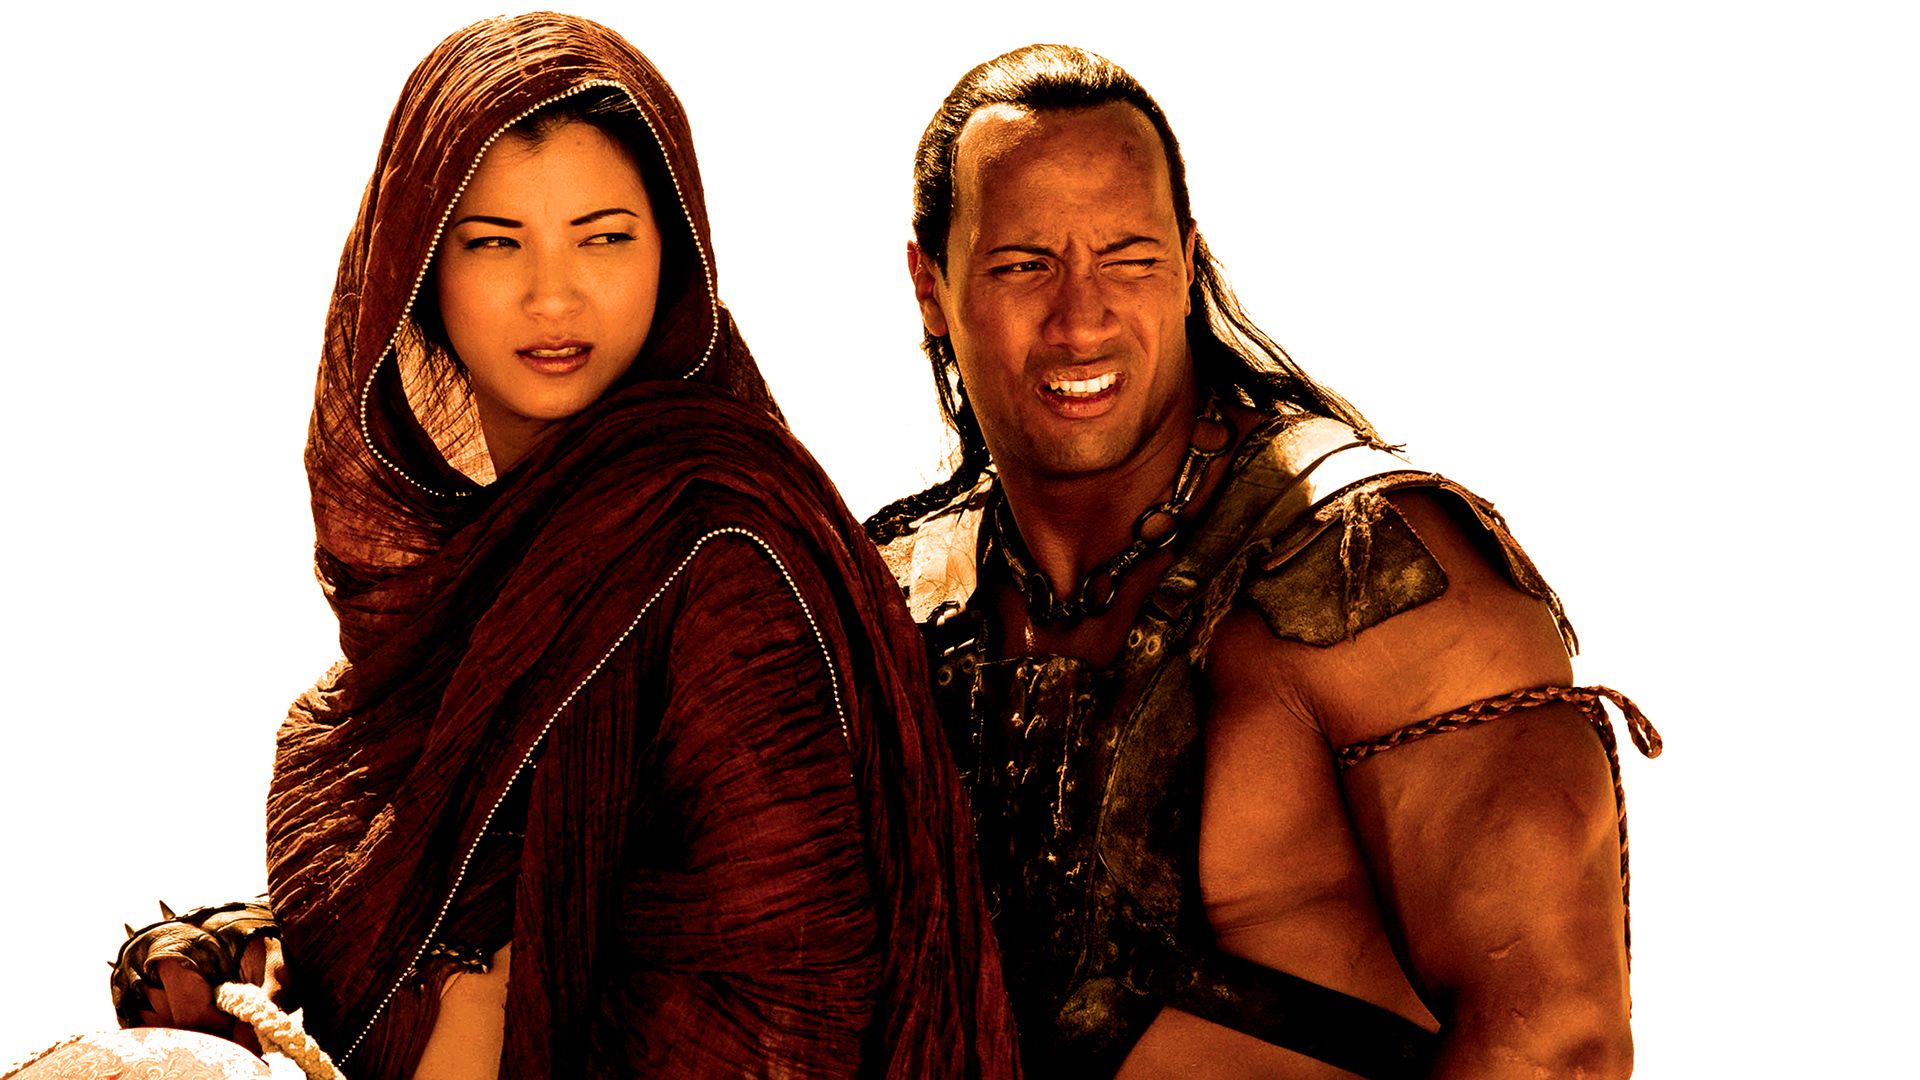 The Scorpion King background